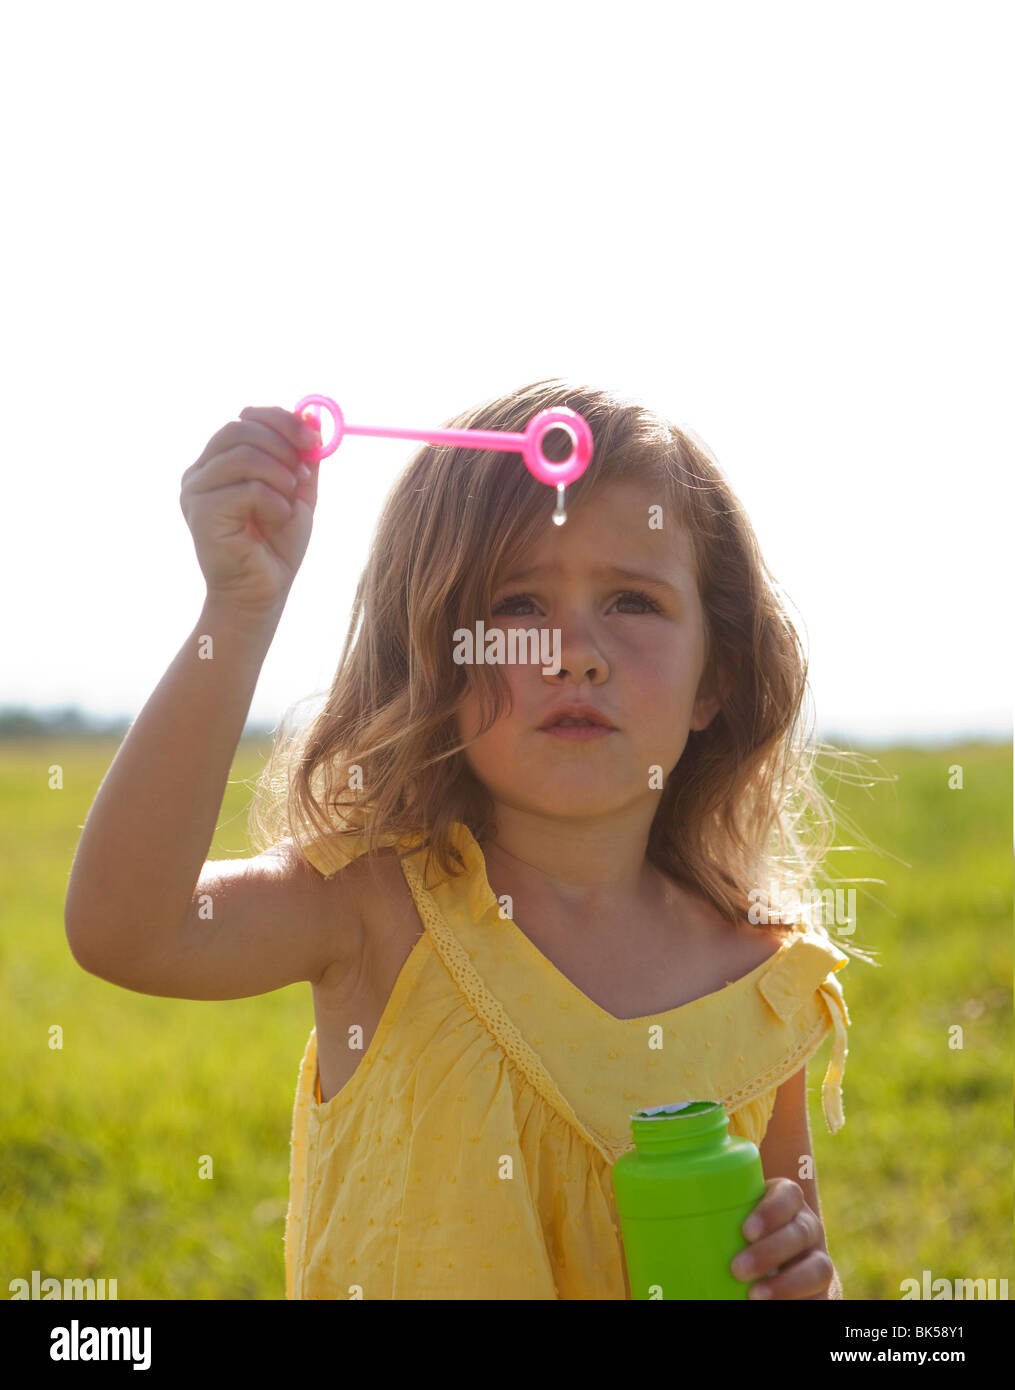 Young girl in yellow sundress blowing bubbles Stock Photo